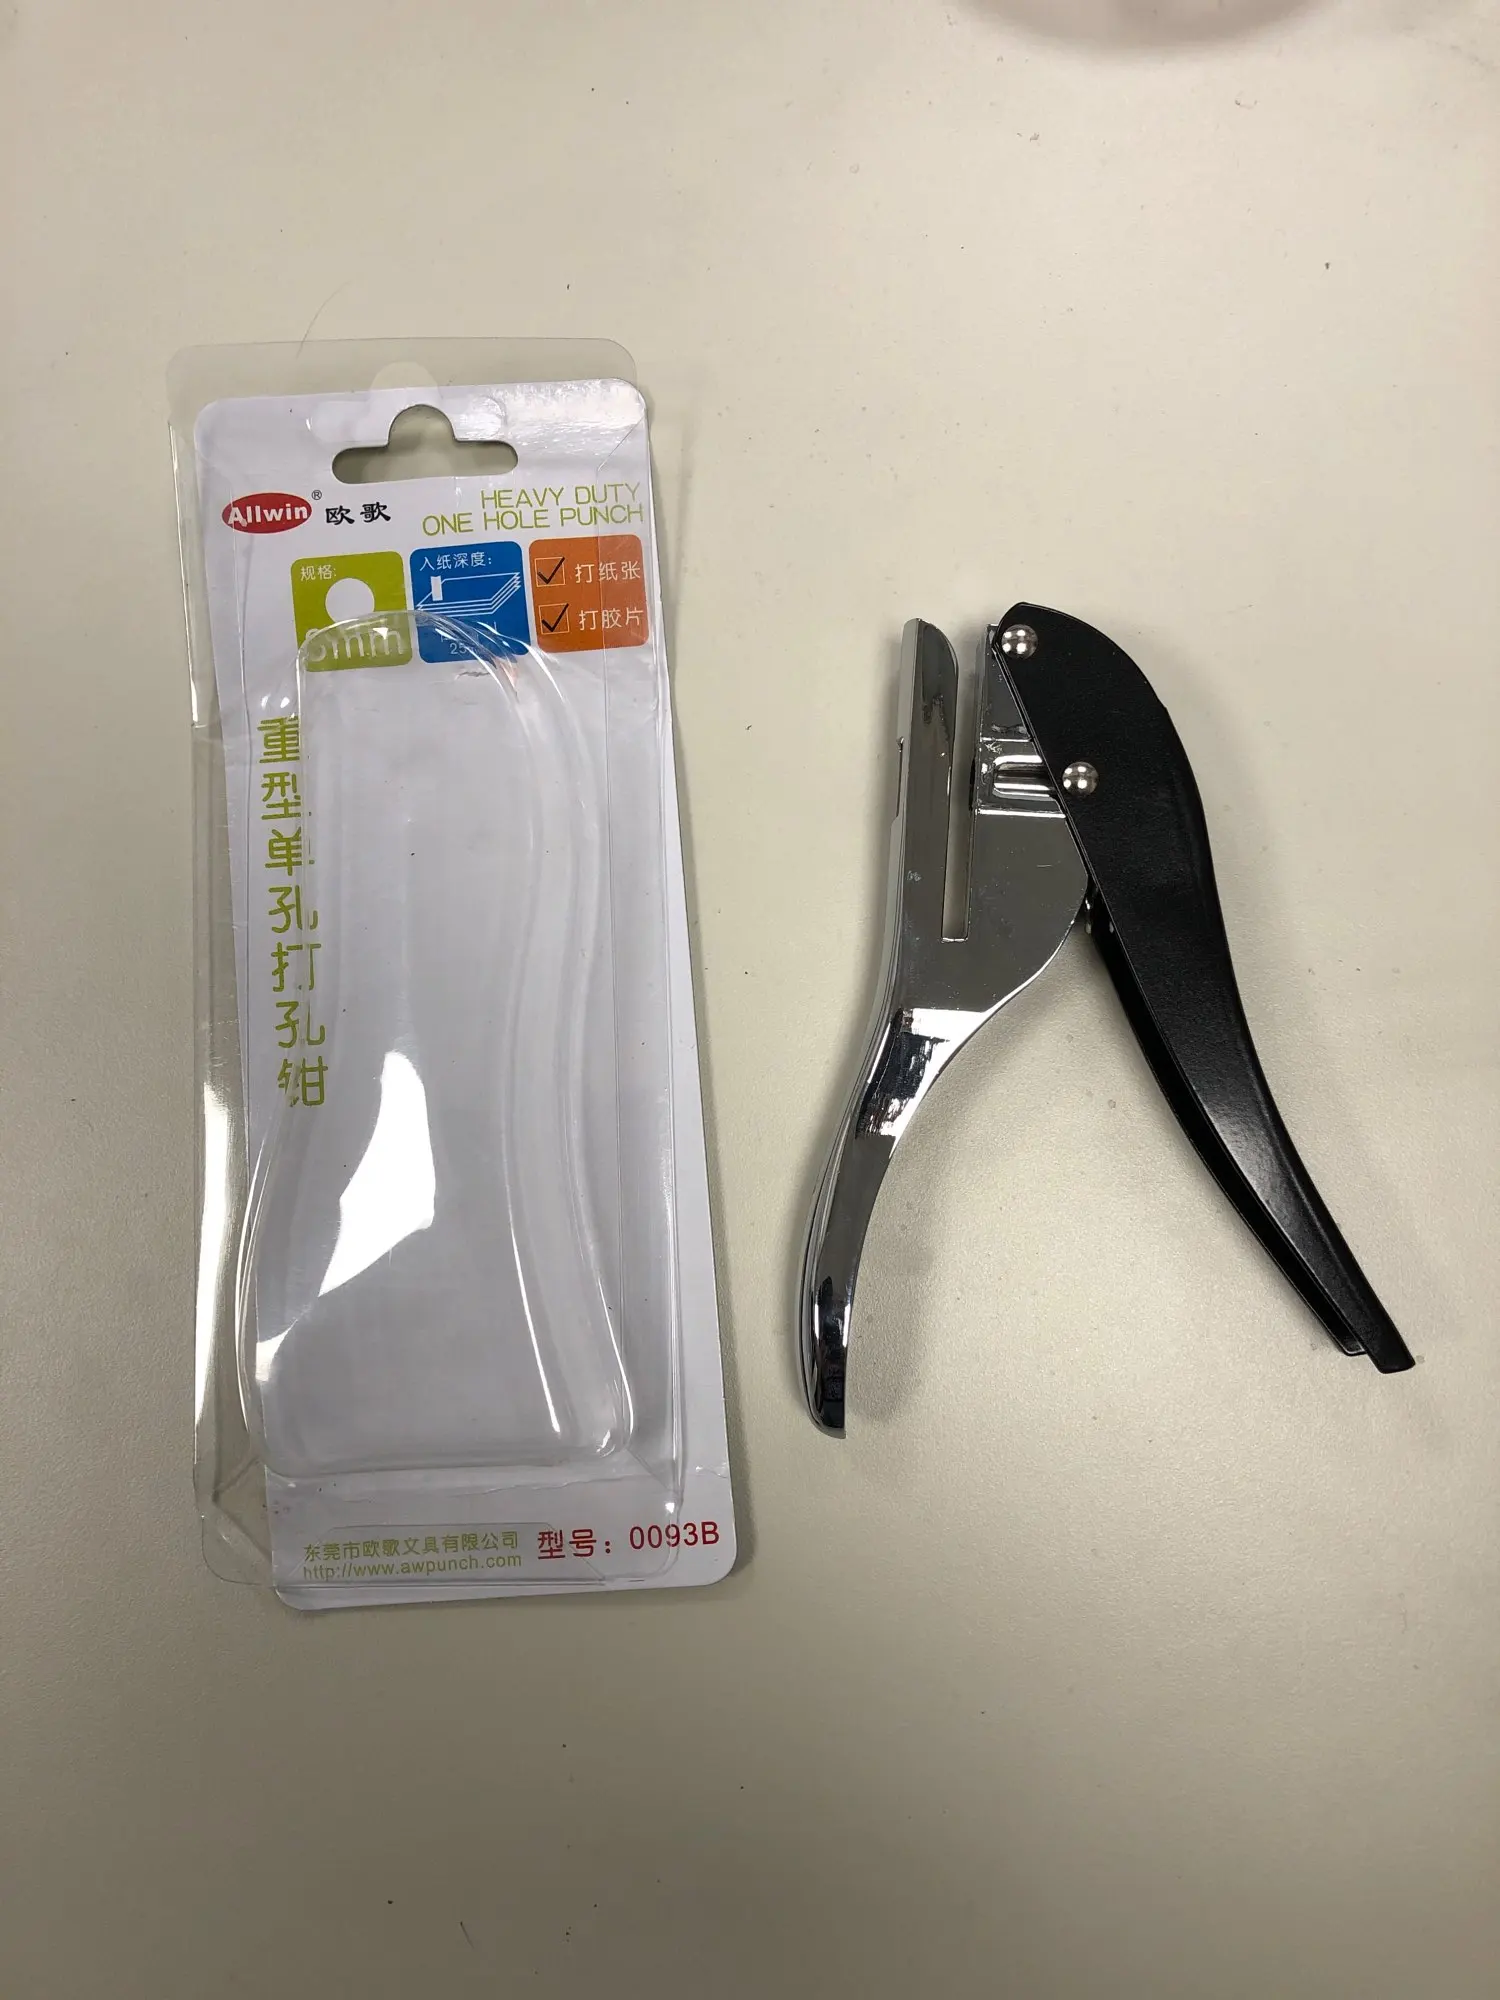 3mm/6mm/8mm circle hole punch paper manual